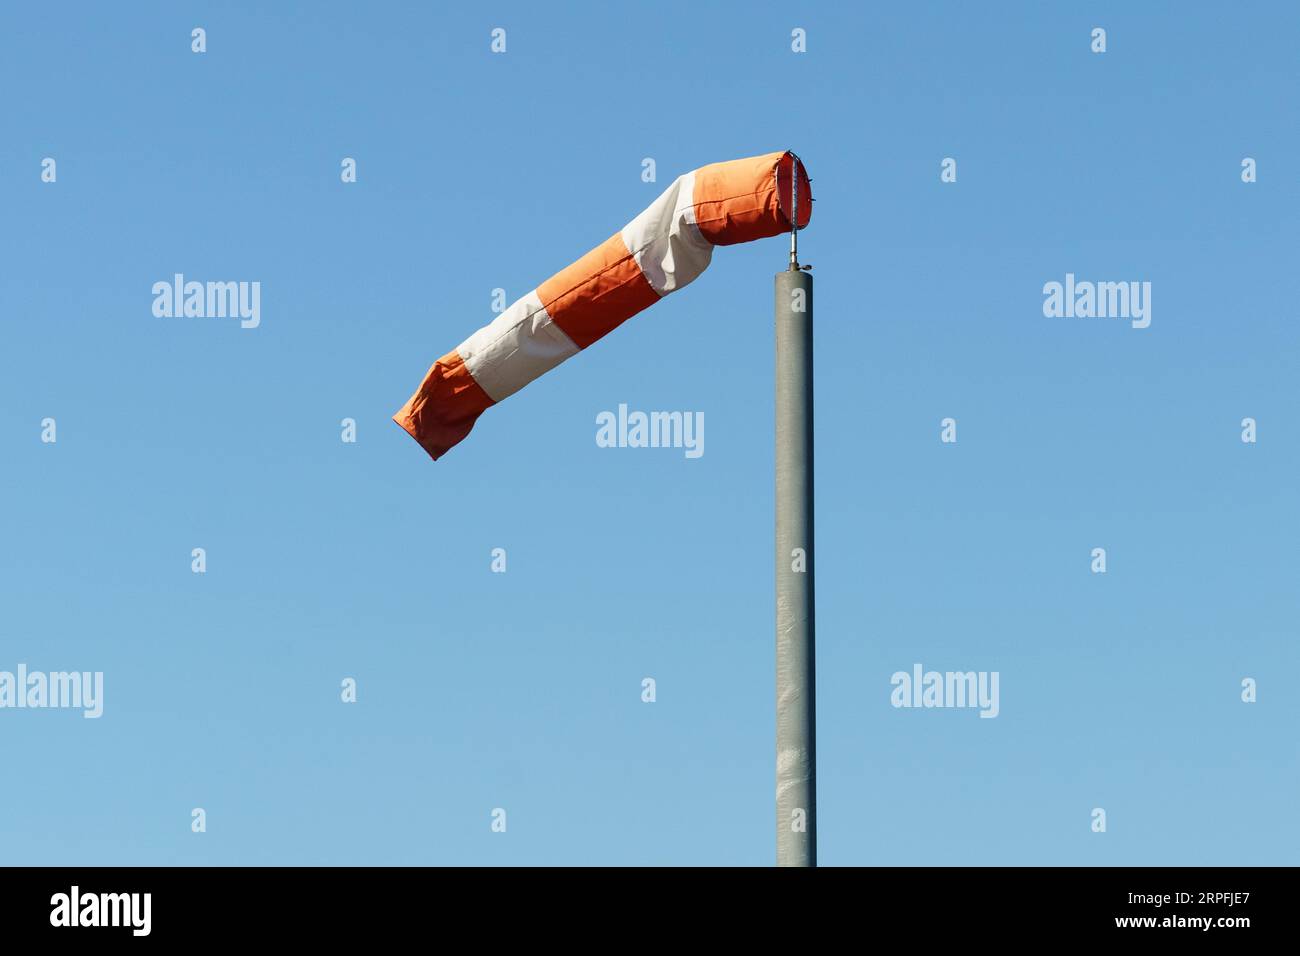 A red and white wind cone indicating the direction and strength of the wind. Strong wind, cone in horizontal position. Stock Photo